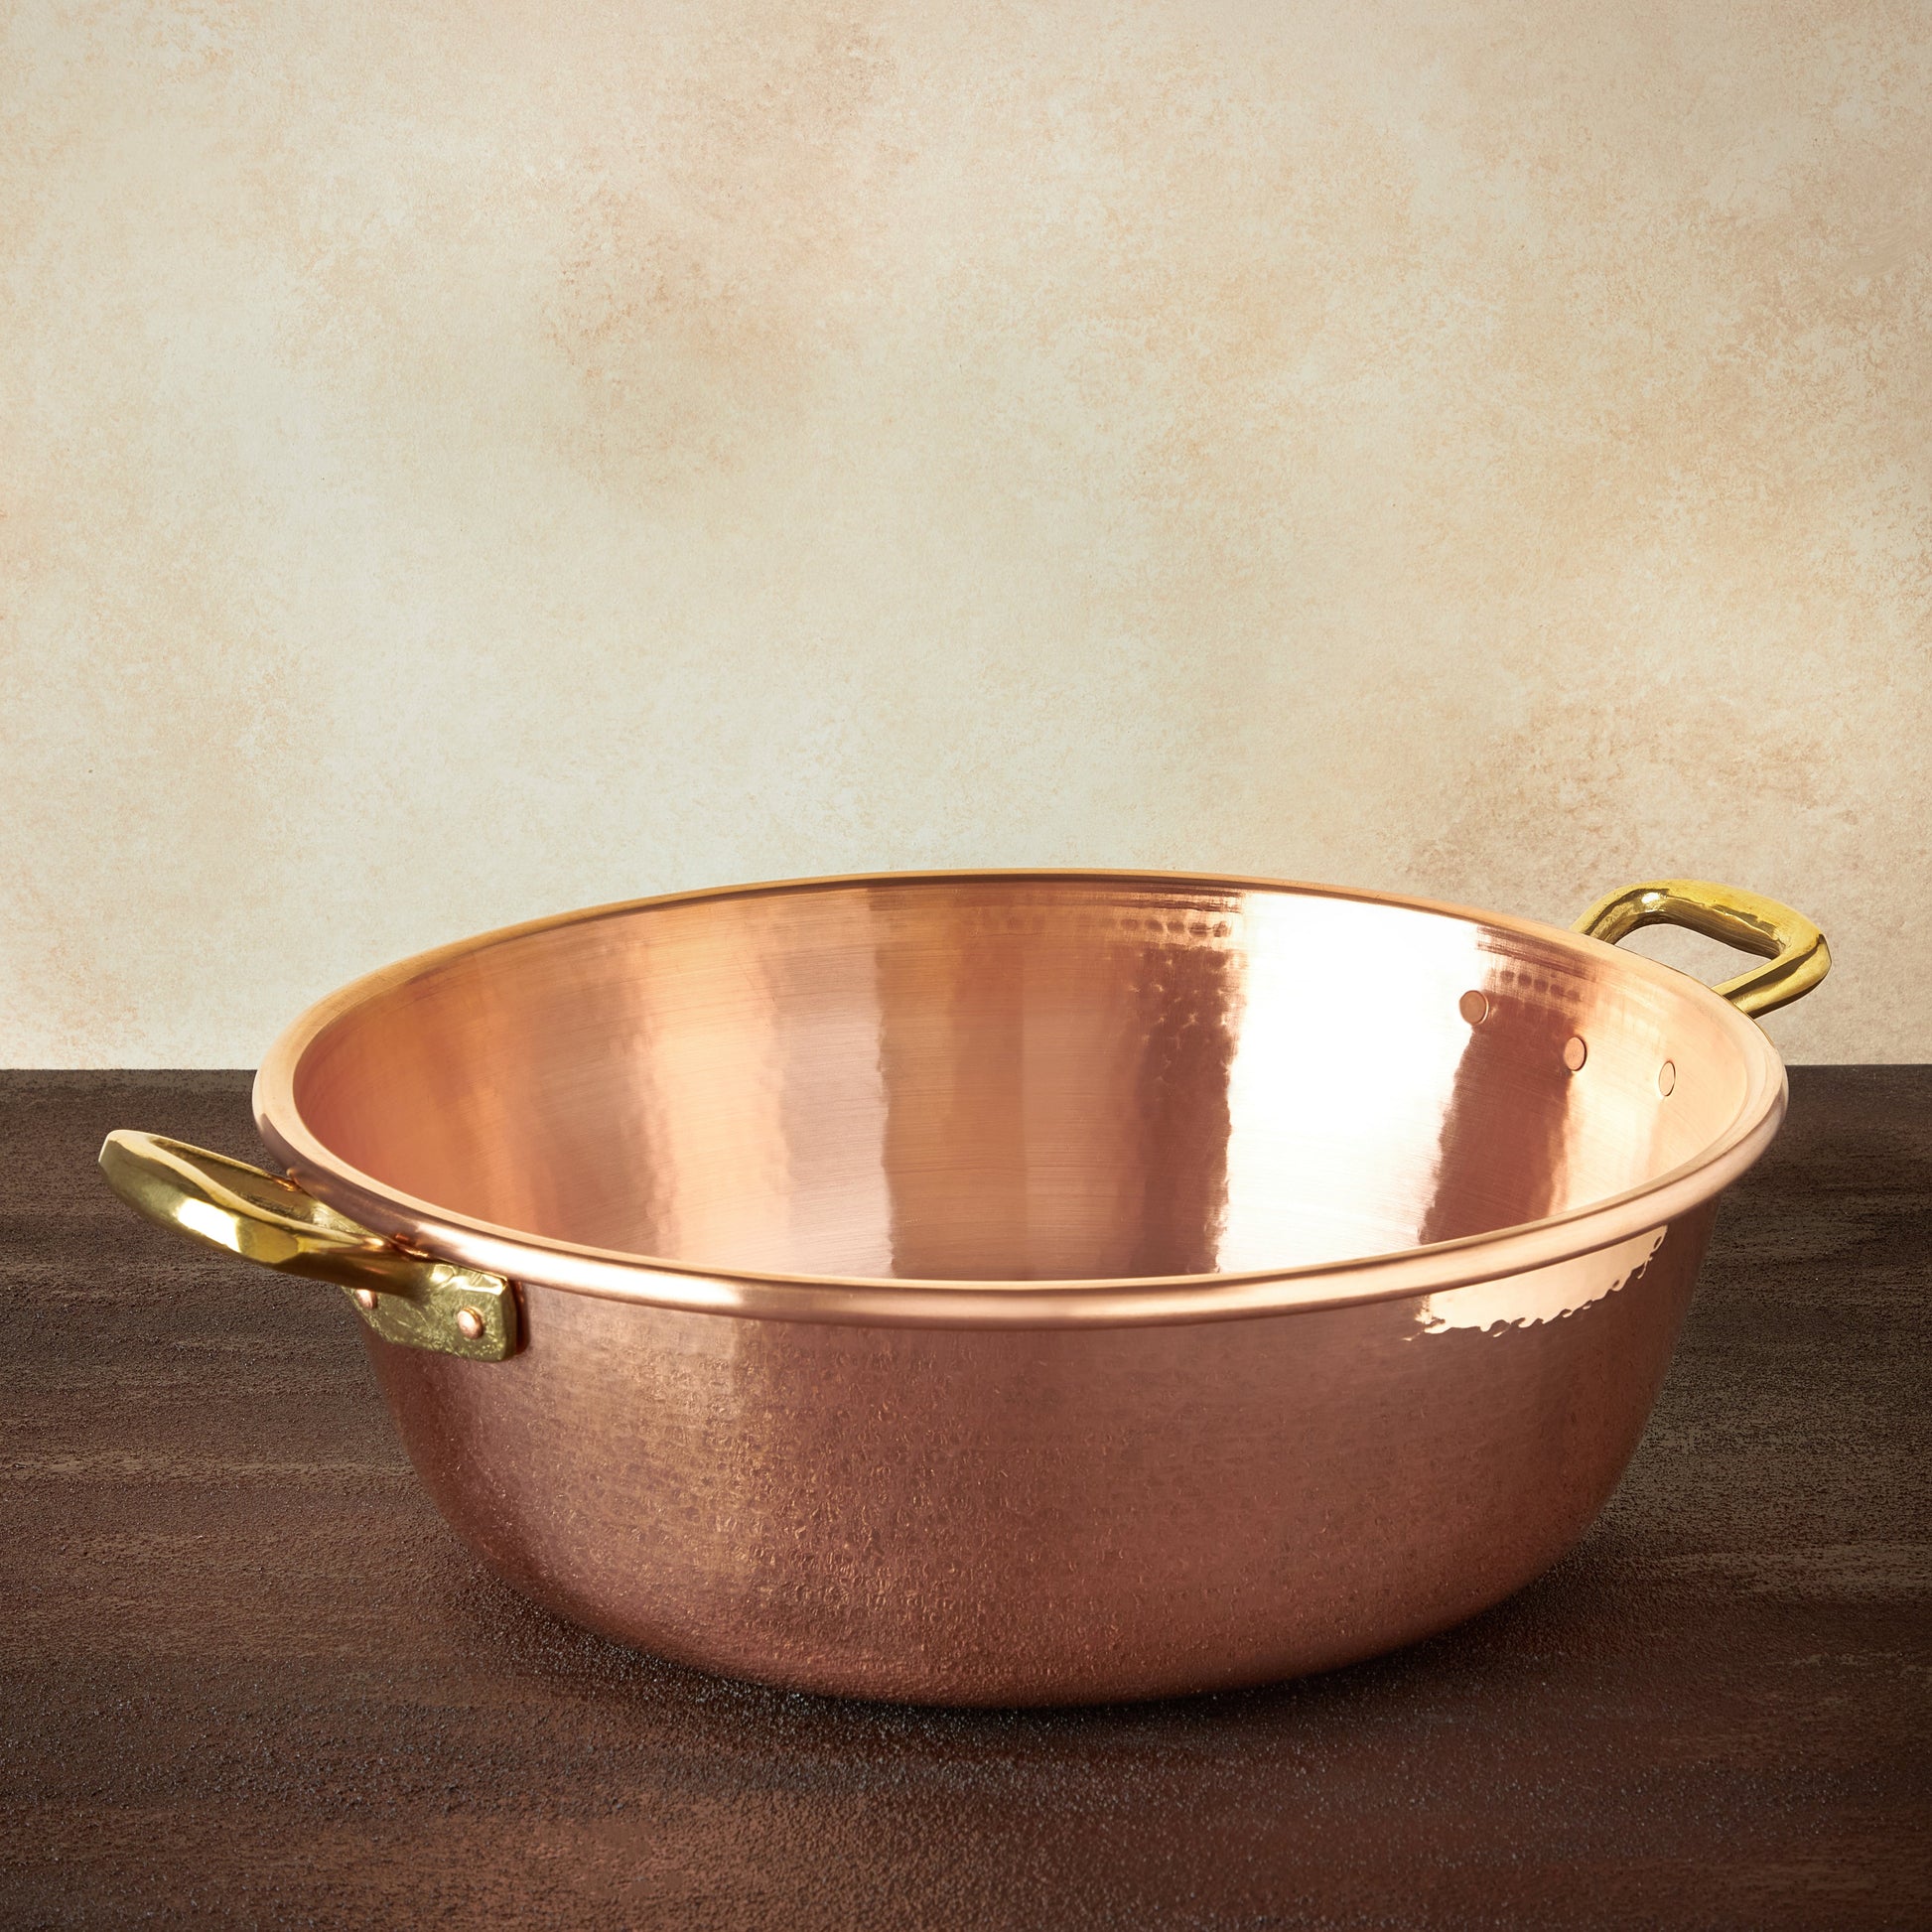 Hammered copper 9.5 Qt Jam Pot lined with high purity tin applied by hand over fire and bronze handles, from Ruffoni Historia collection